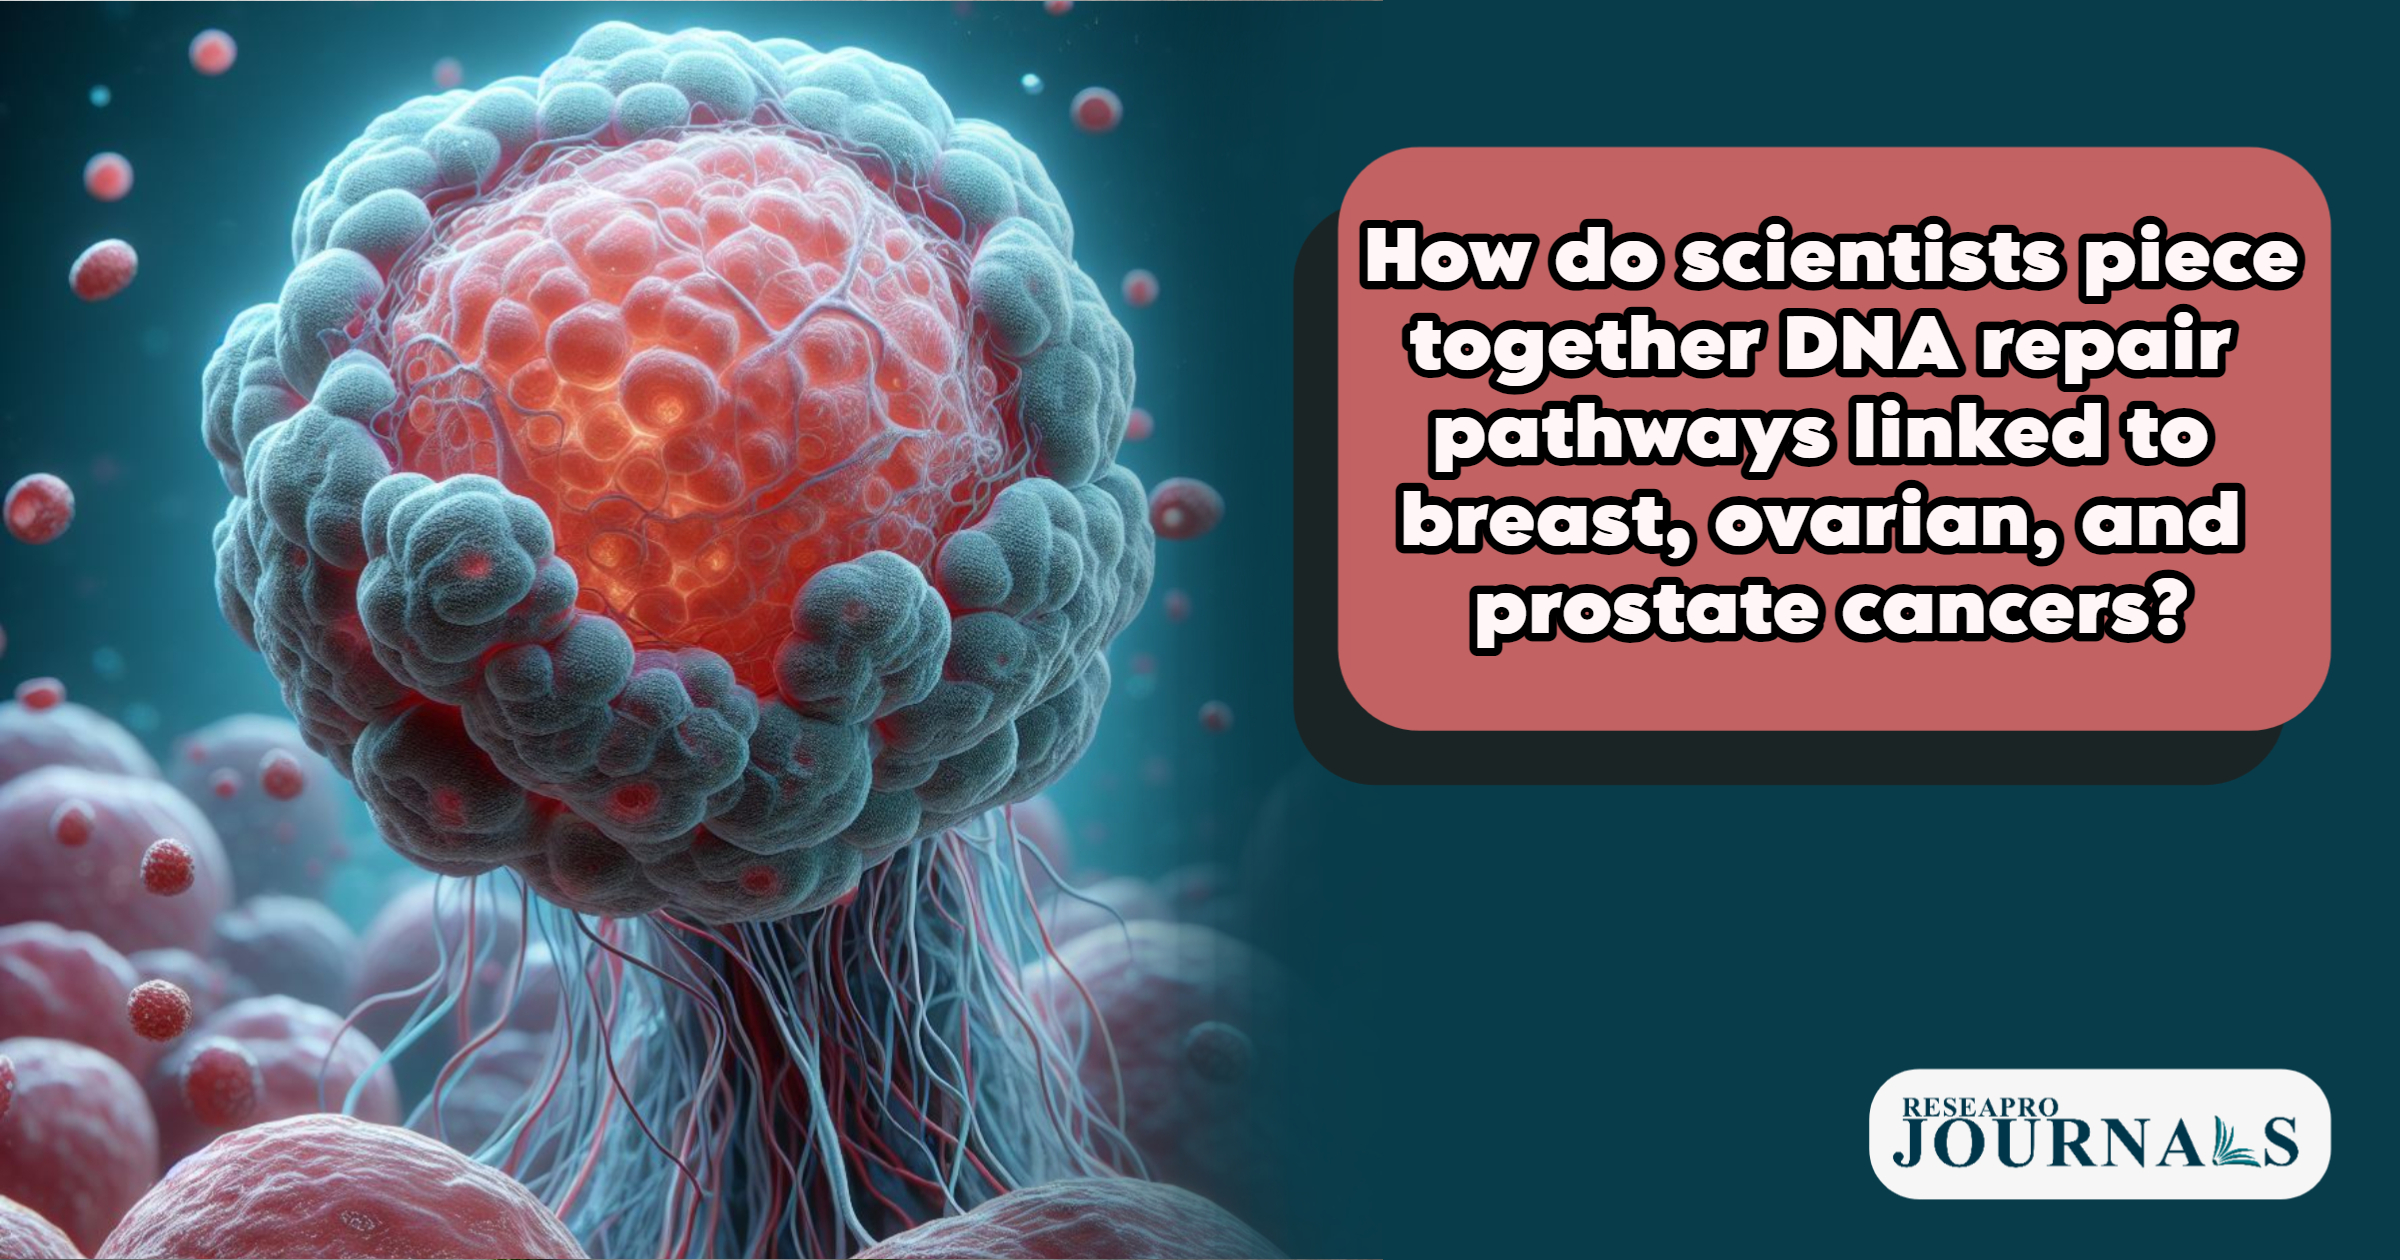 Deciphering DNA Repair Pathways in Breast, Ovarian, and Prostate Cancers